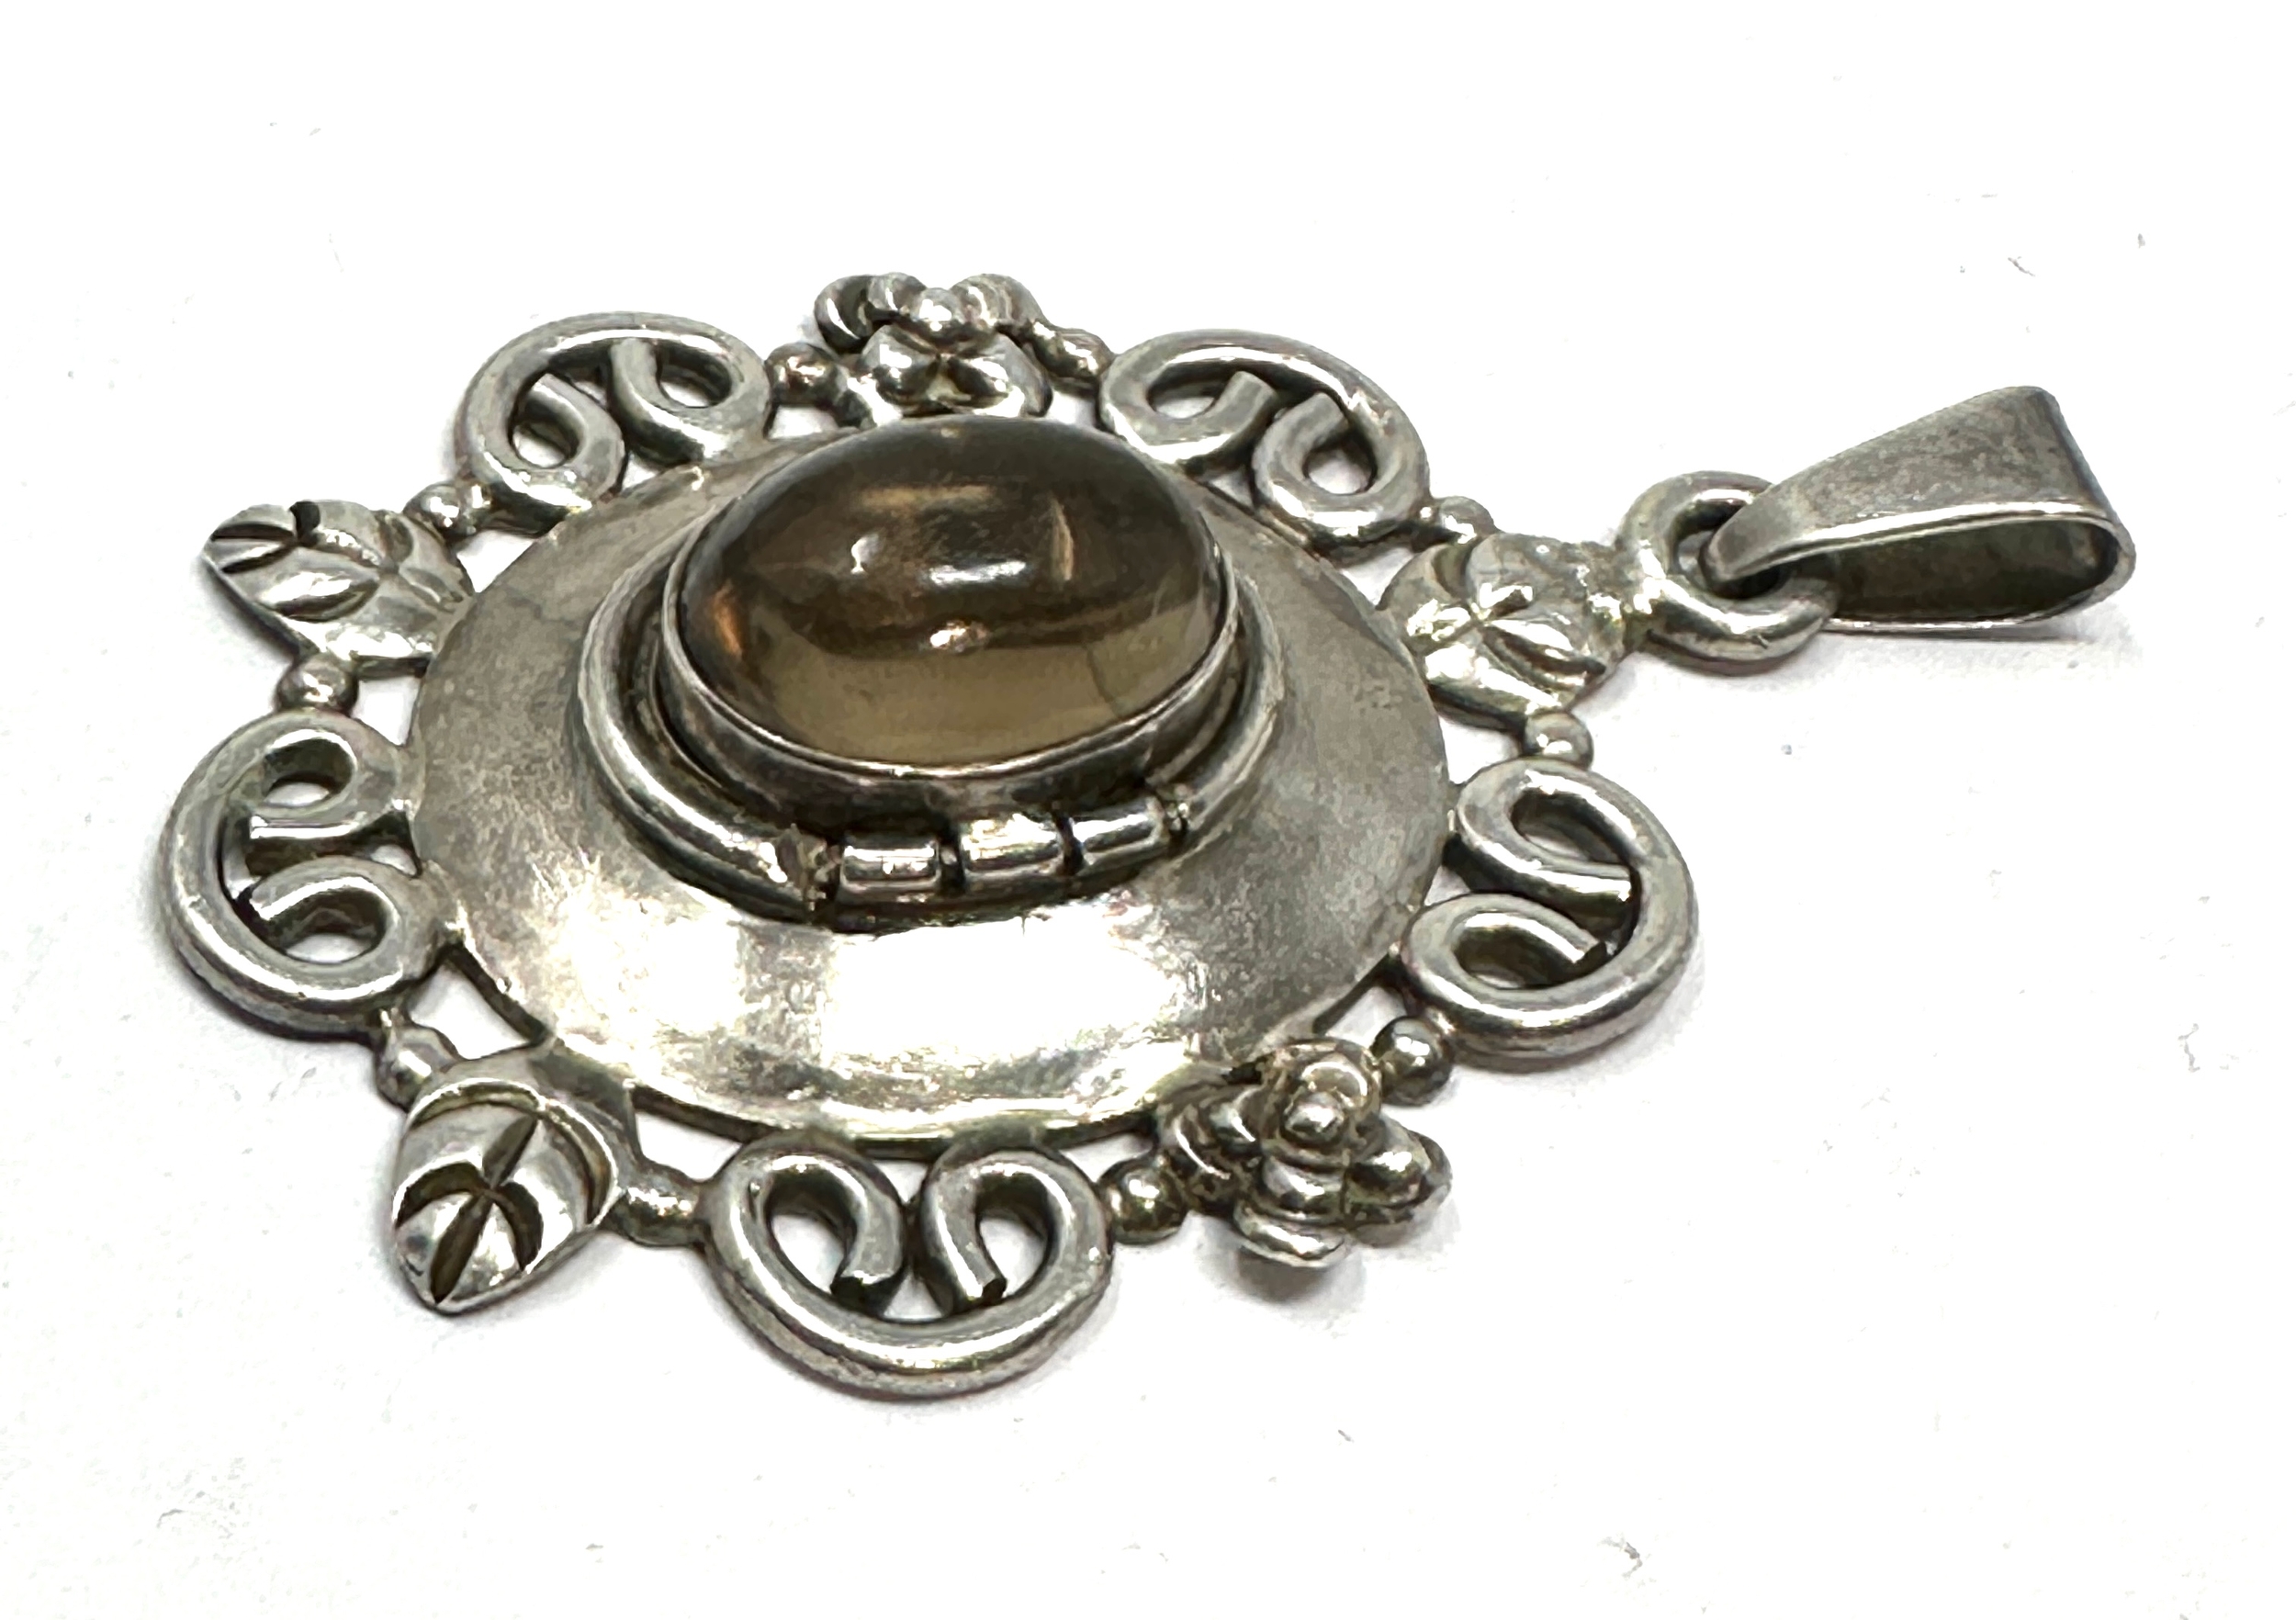 Rare mexico LOS BALLESTEROS Sterling Silver gemstone Poison pendant measures approx 7cm drop by 4. - Image 2 of 5